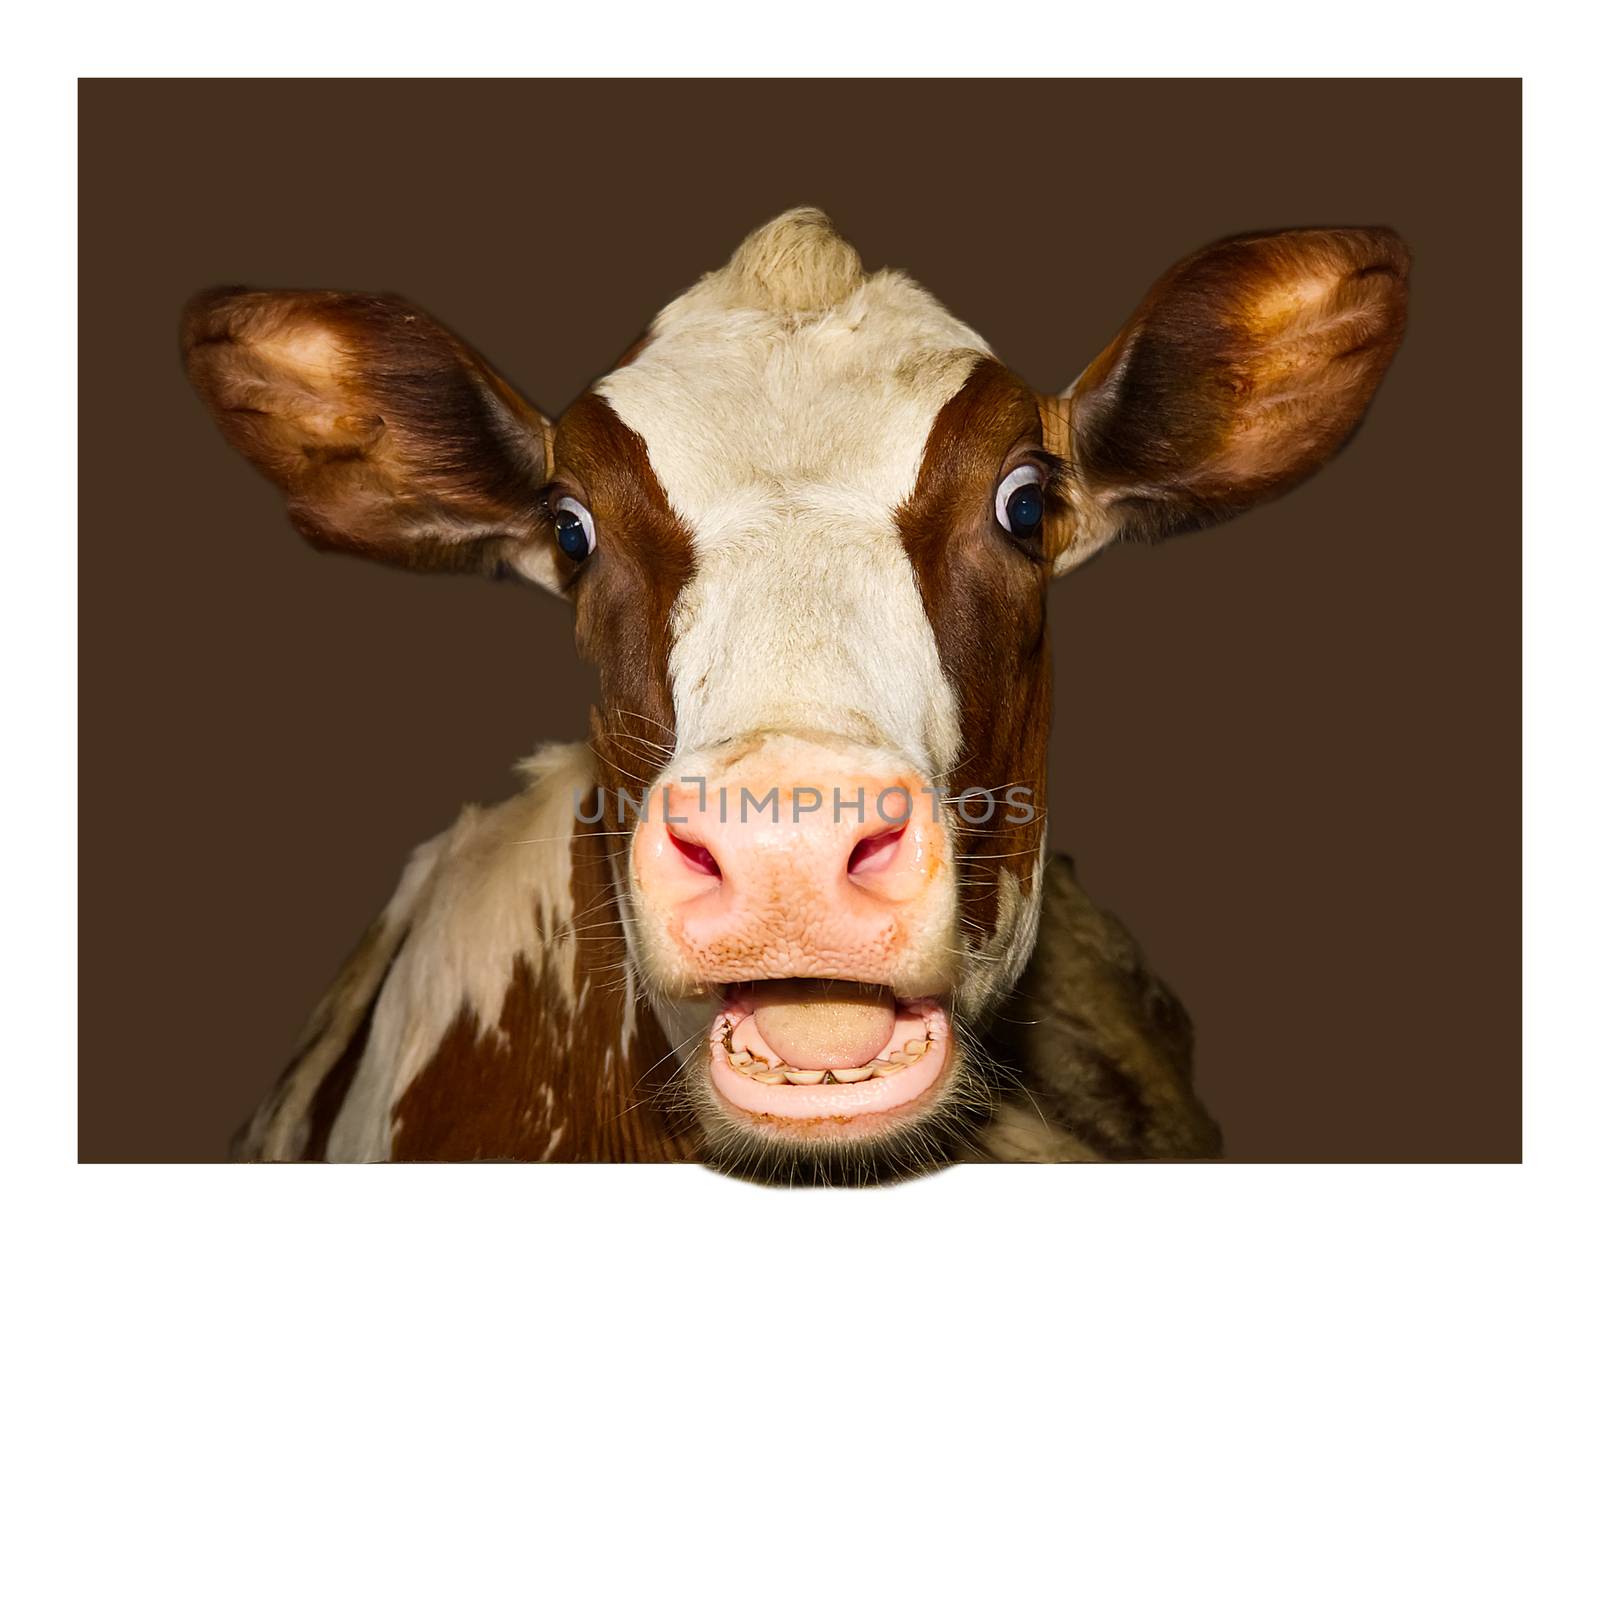 Funny and happy cute baby calf, funny photo great for use with wow memes. Funny shootof wondering orange calf in farm, 2021 year of cow